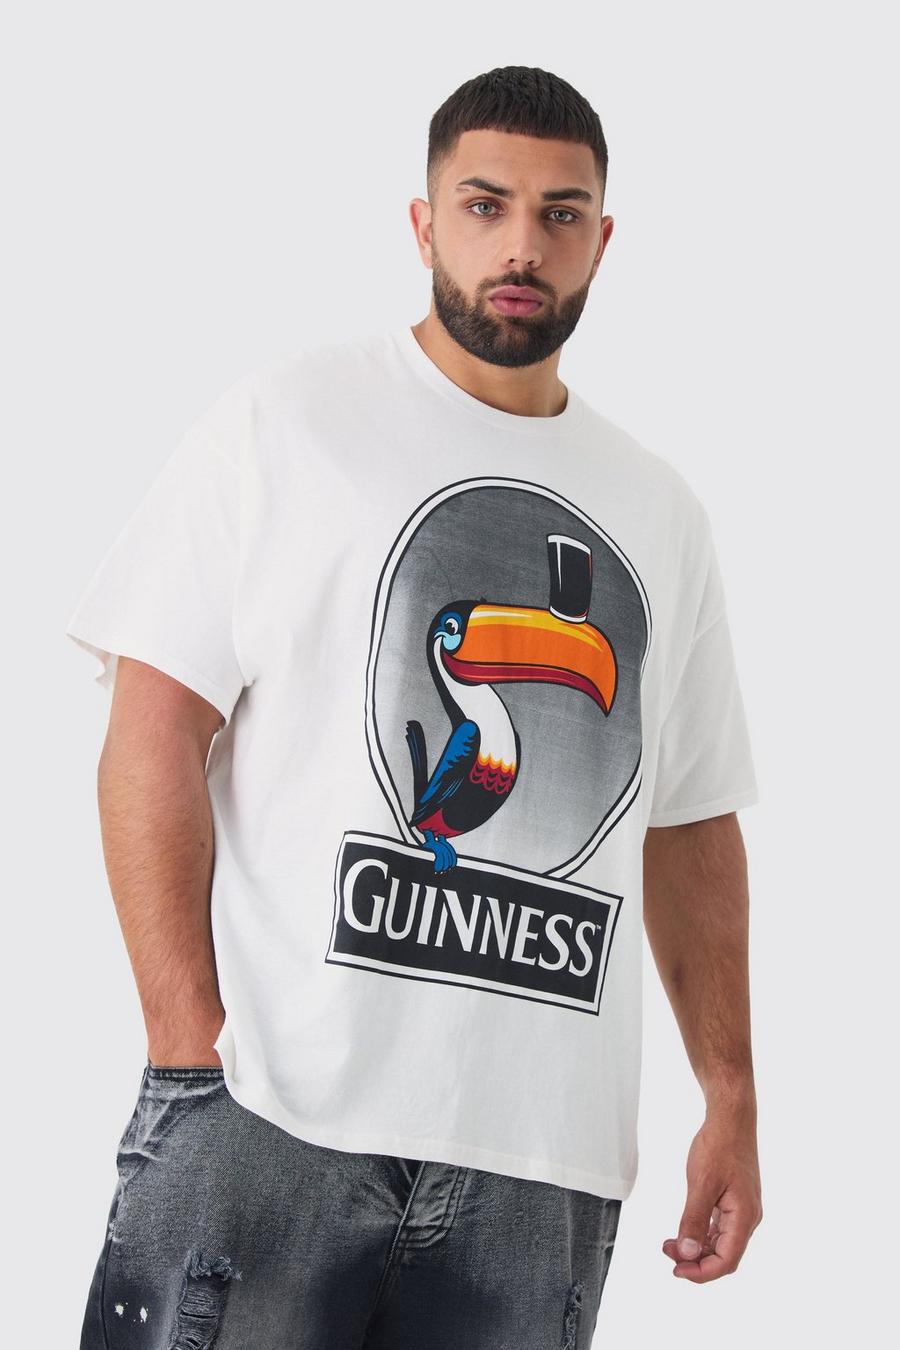 Plus Guinness Printed Licensed T-shirt In White